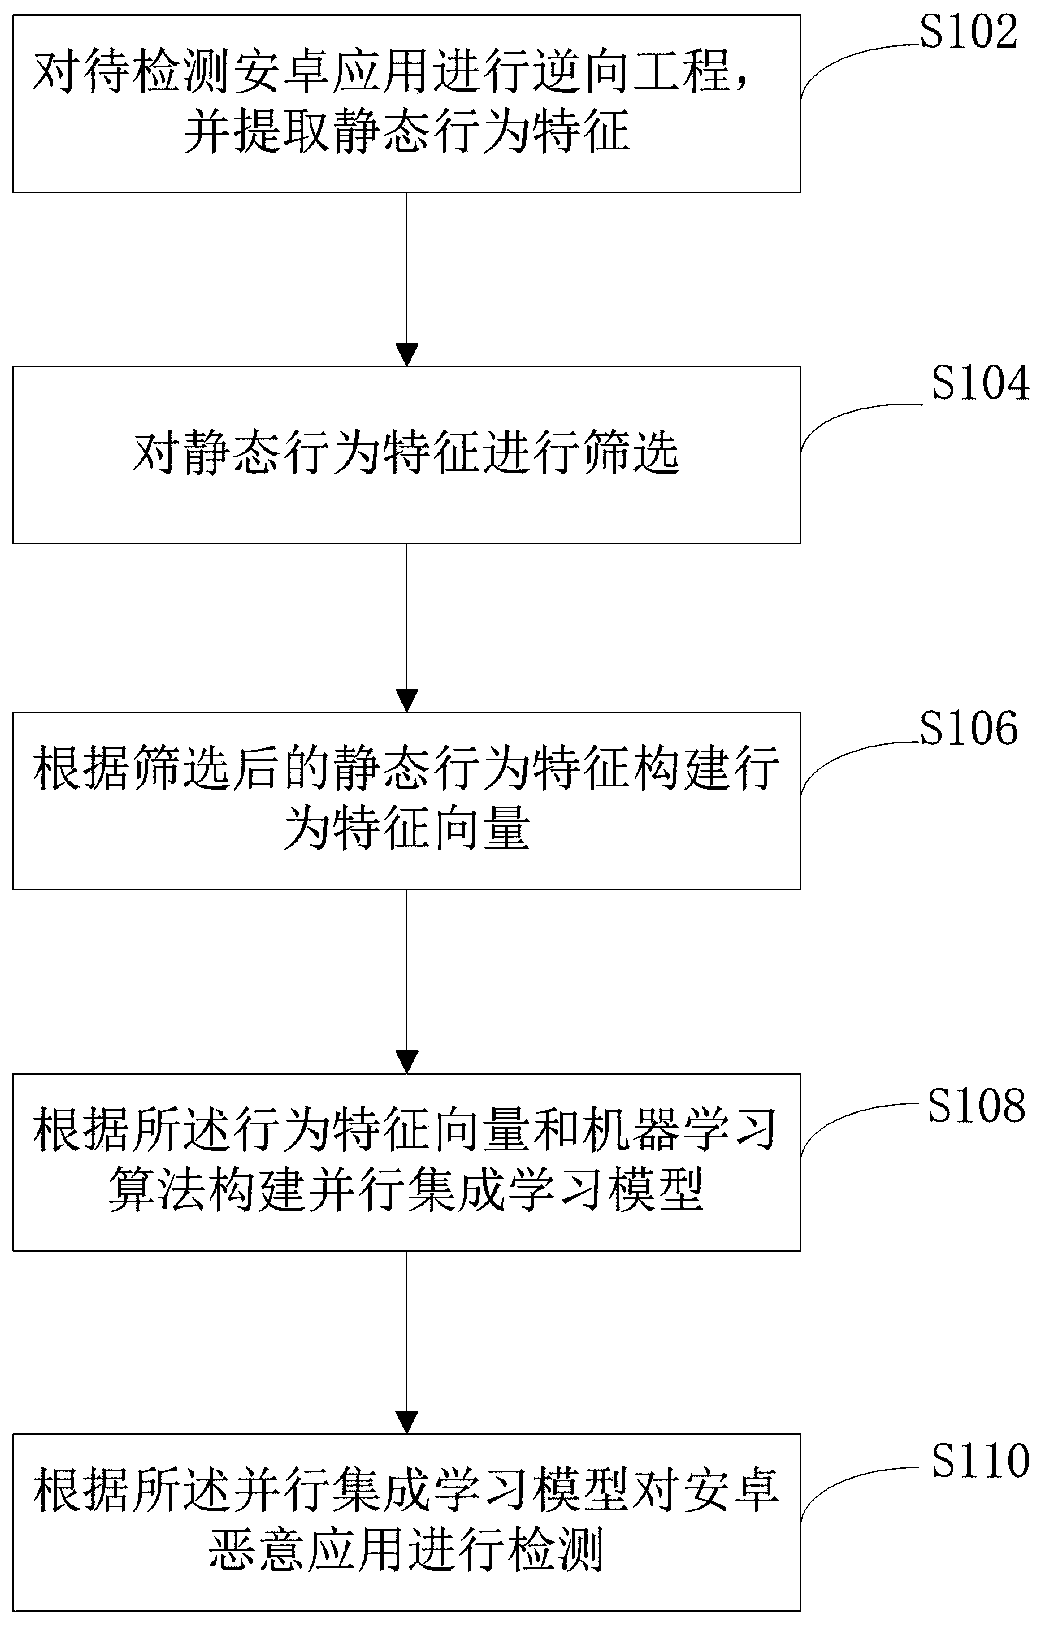 Android malicious application detection method and system based on parallel ensemble learning